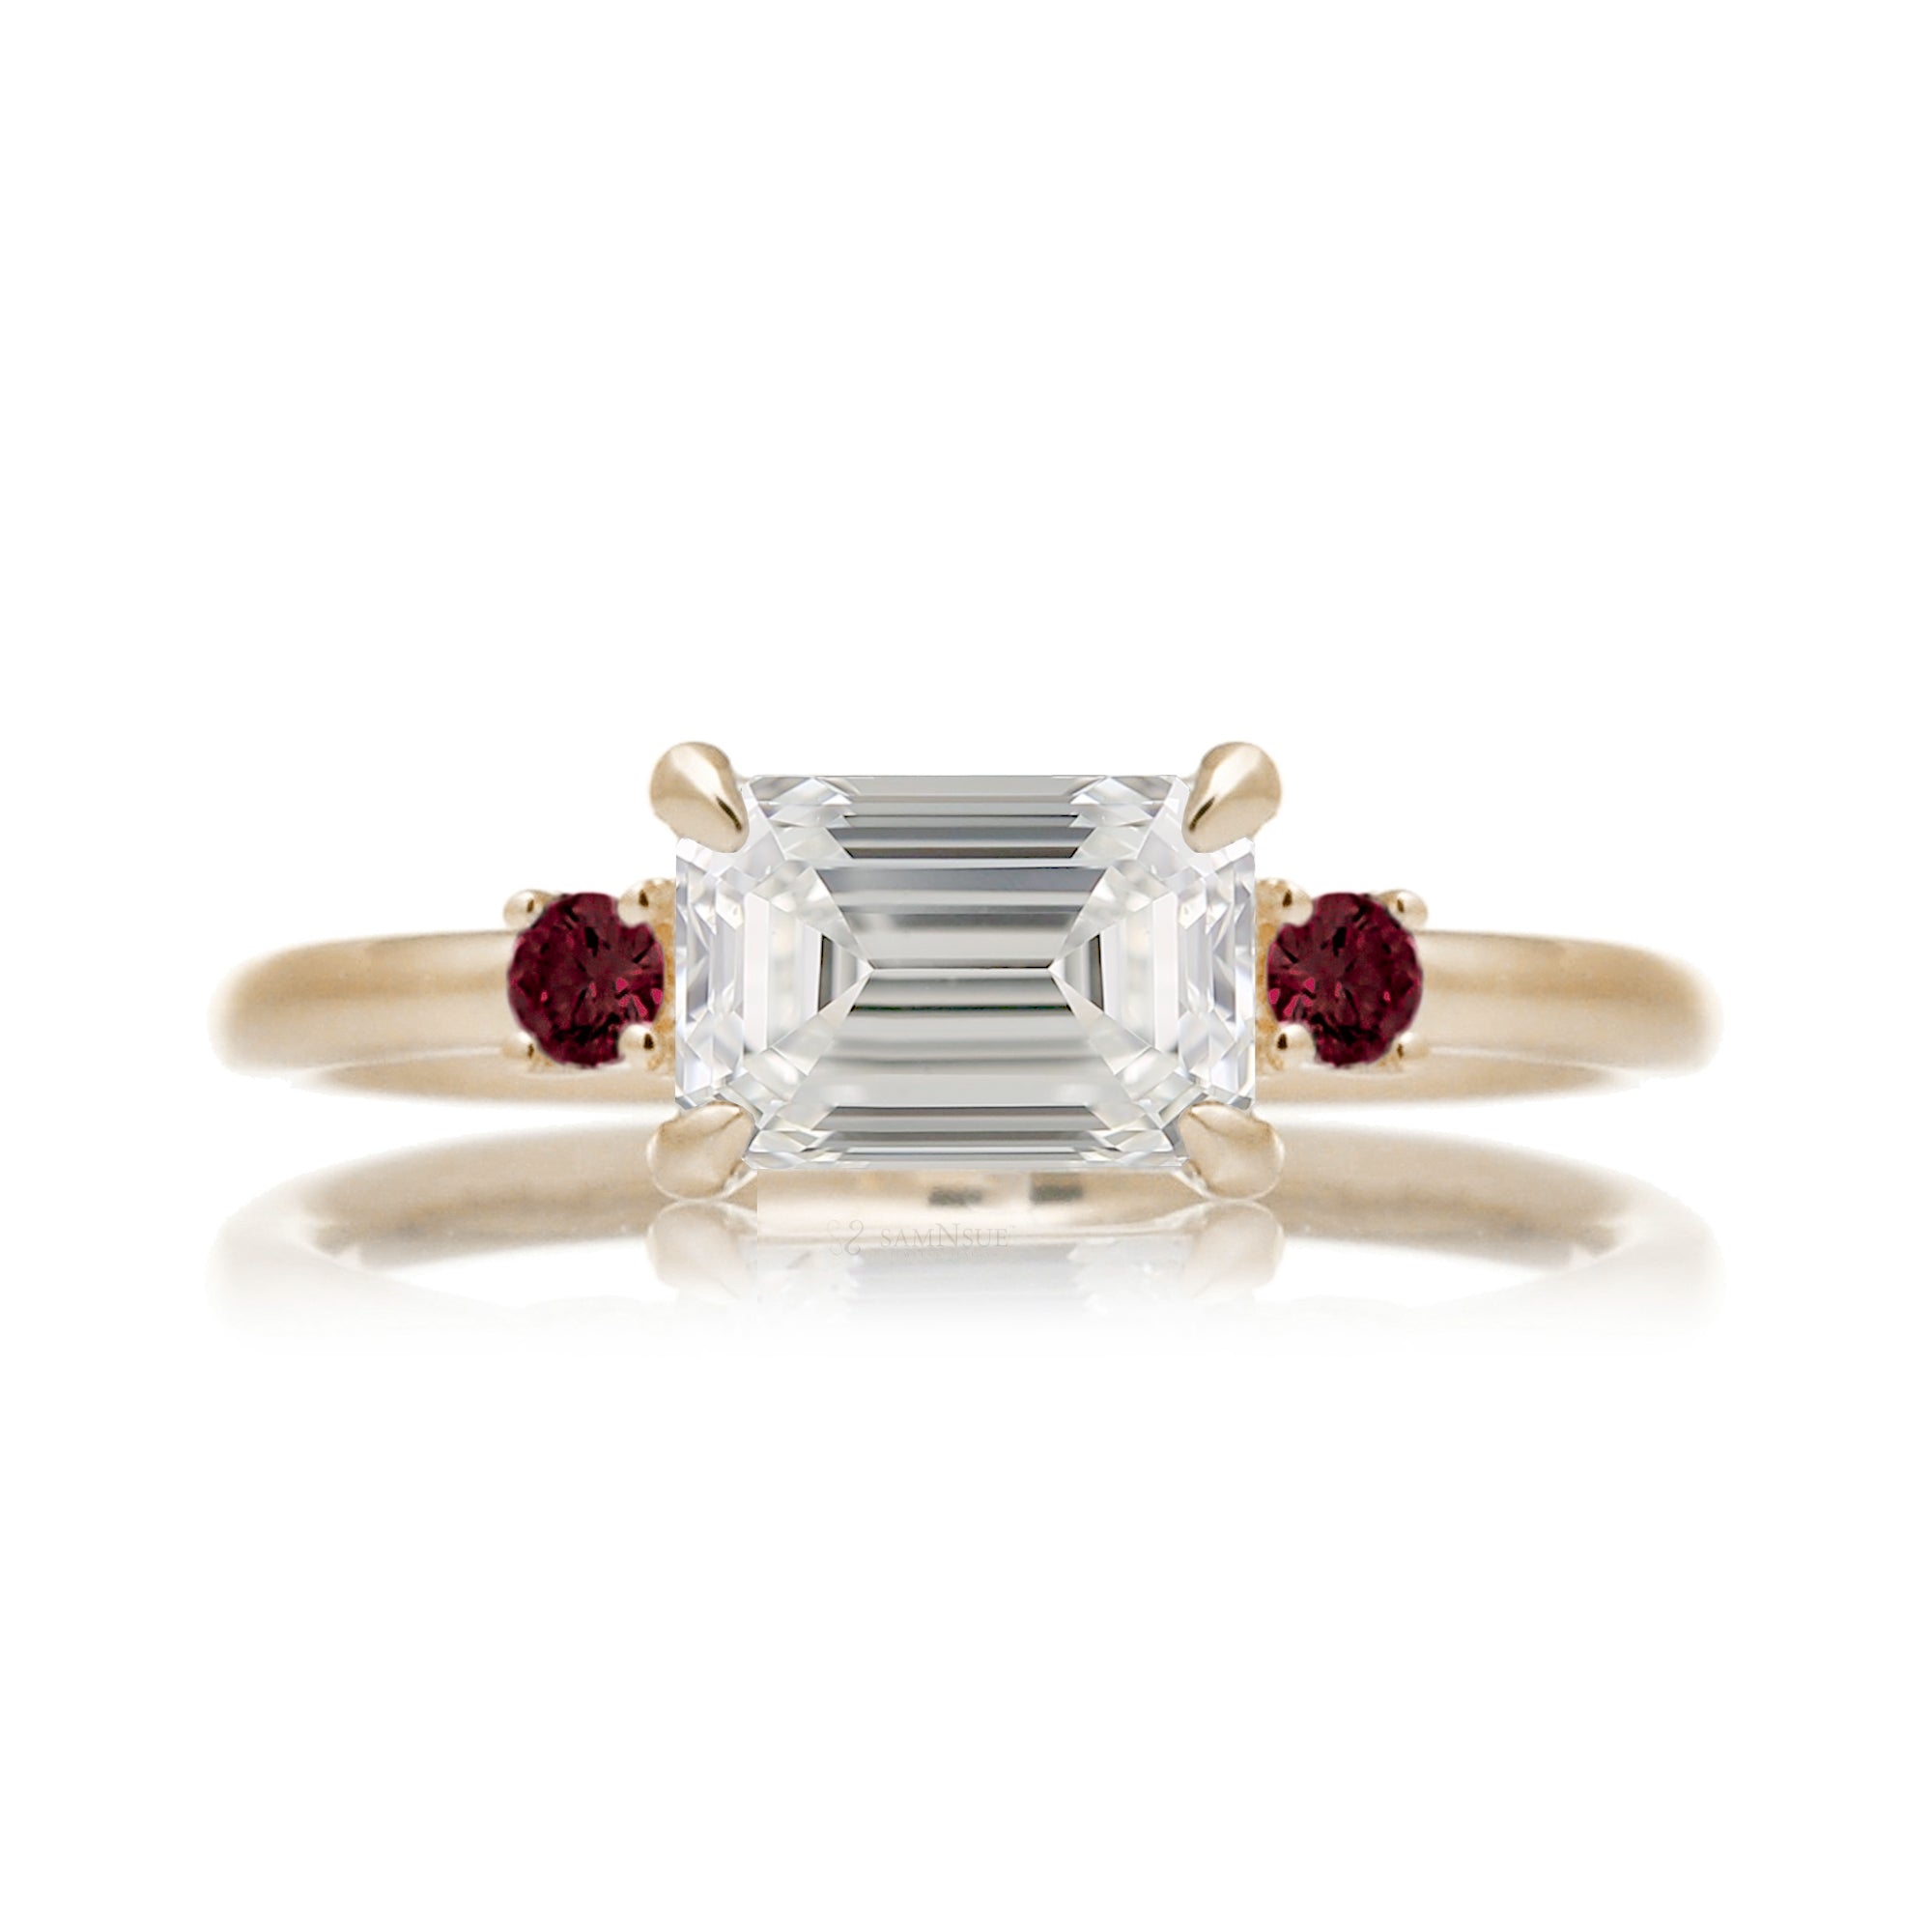 east-west emerald cut diamond three stone ring the Lena with side red rubies yellow gold